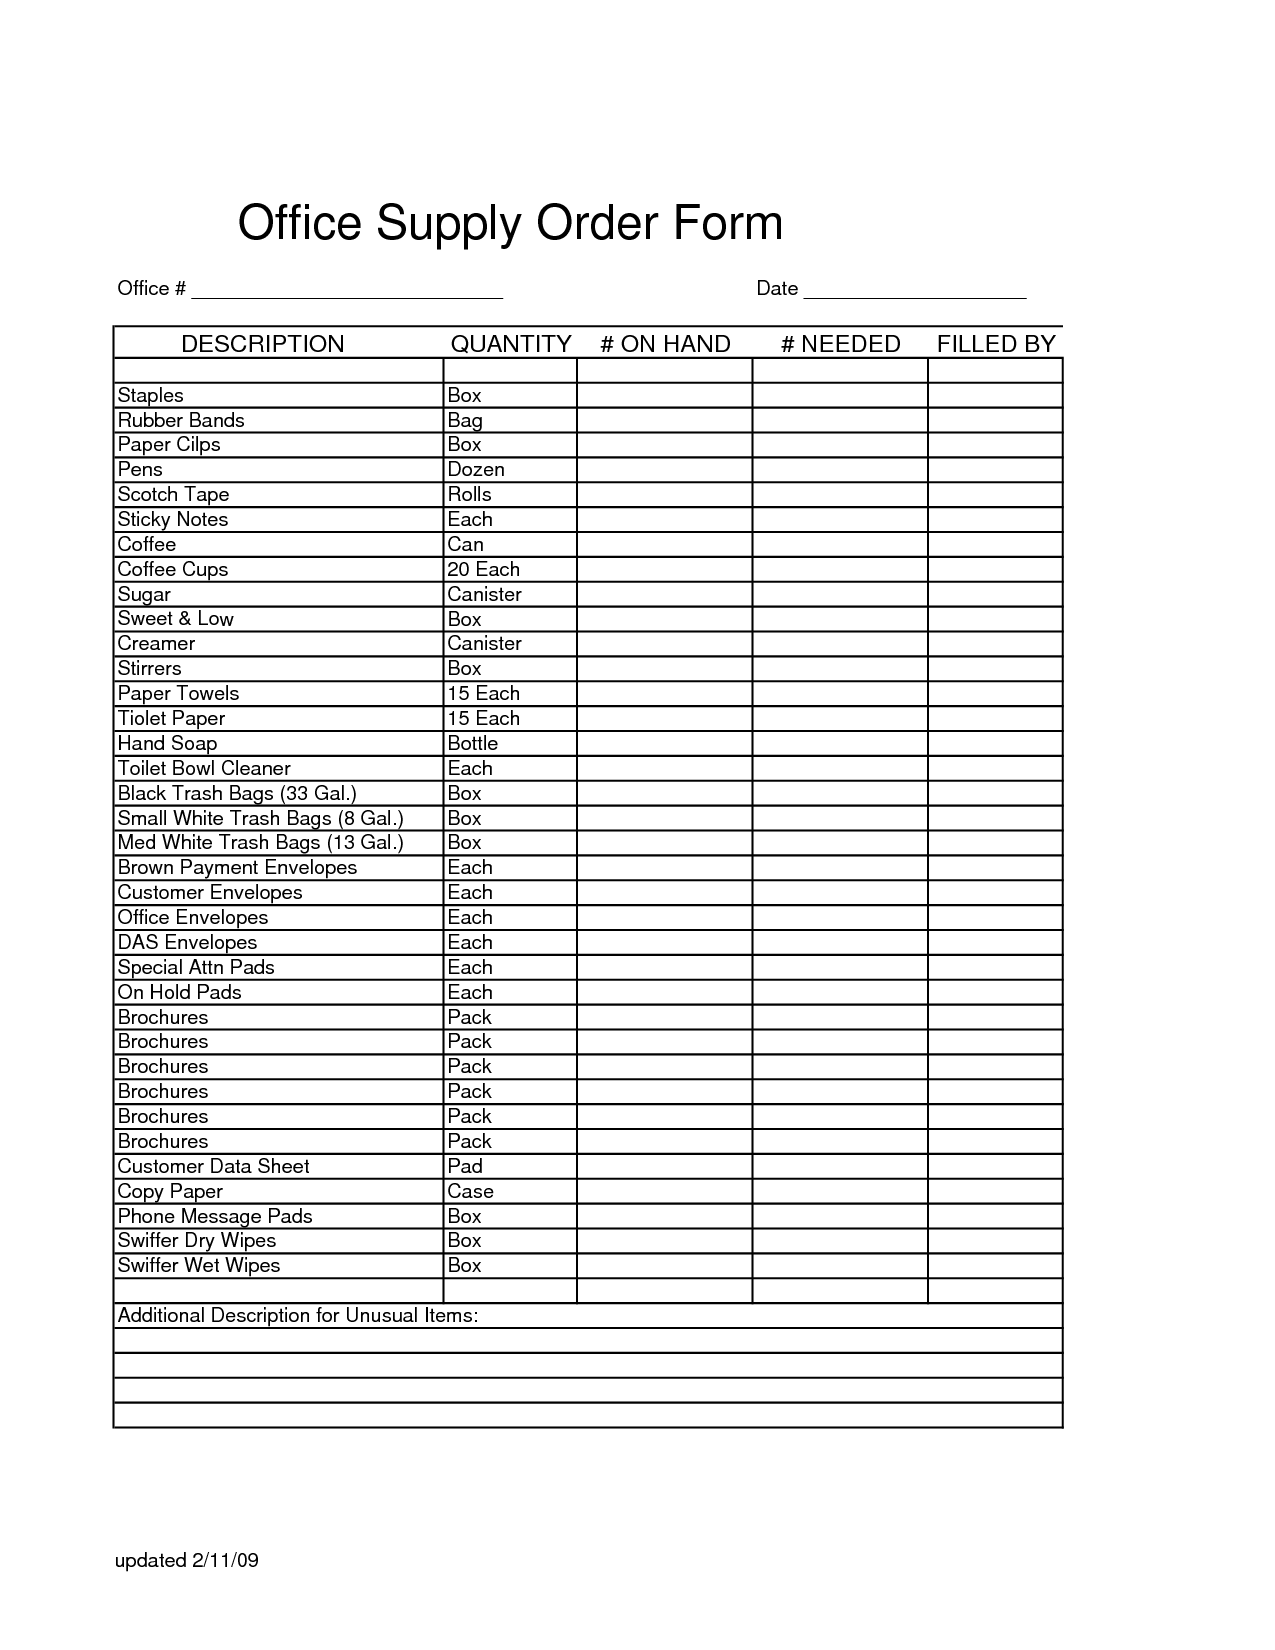 office supply form template 10 supply order templates free sample 